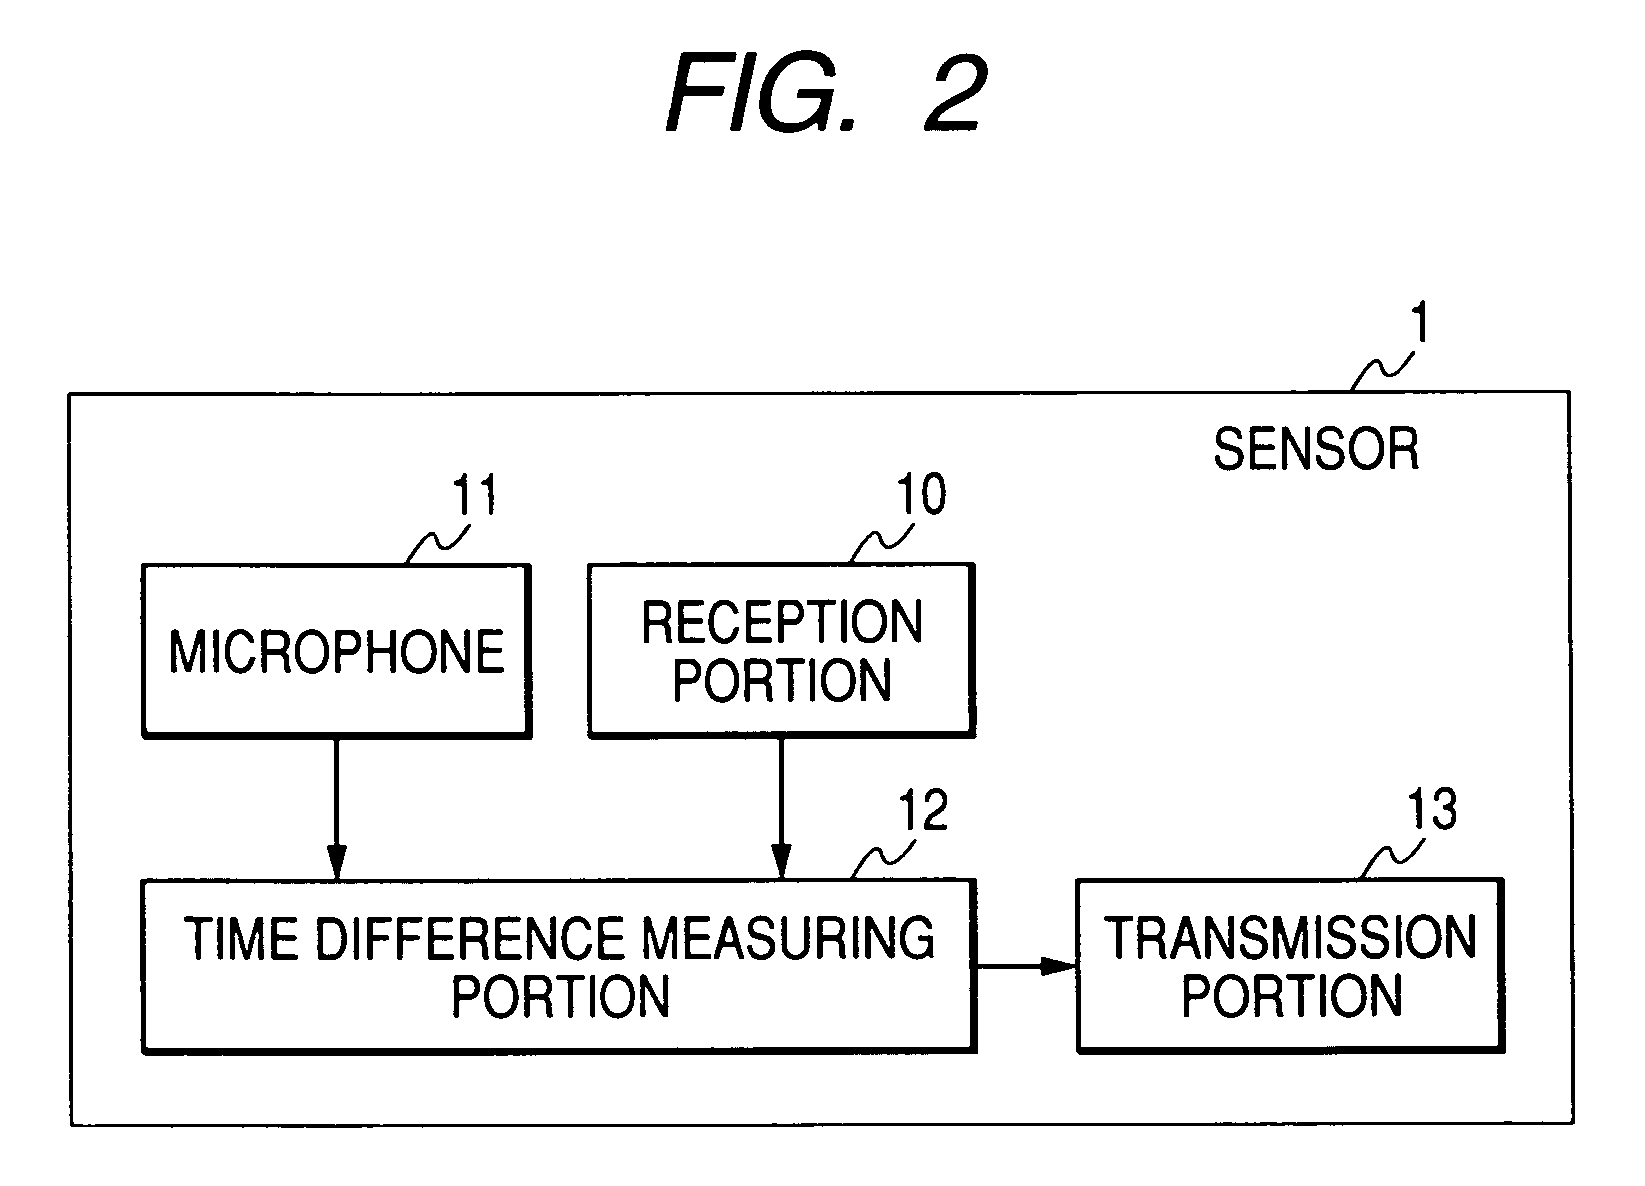 Sound reproducing apparatus and method of identifying positions of speakers